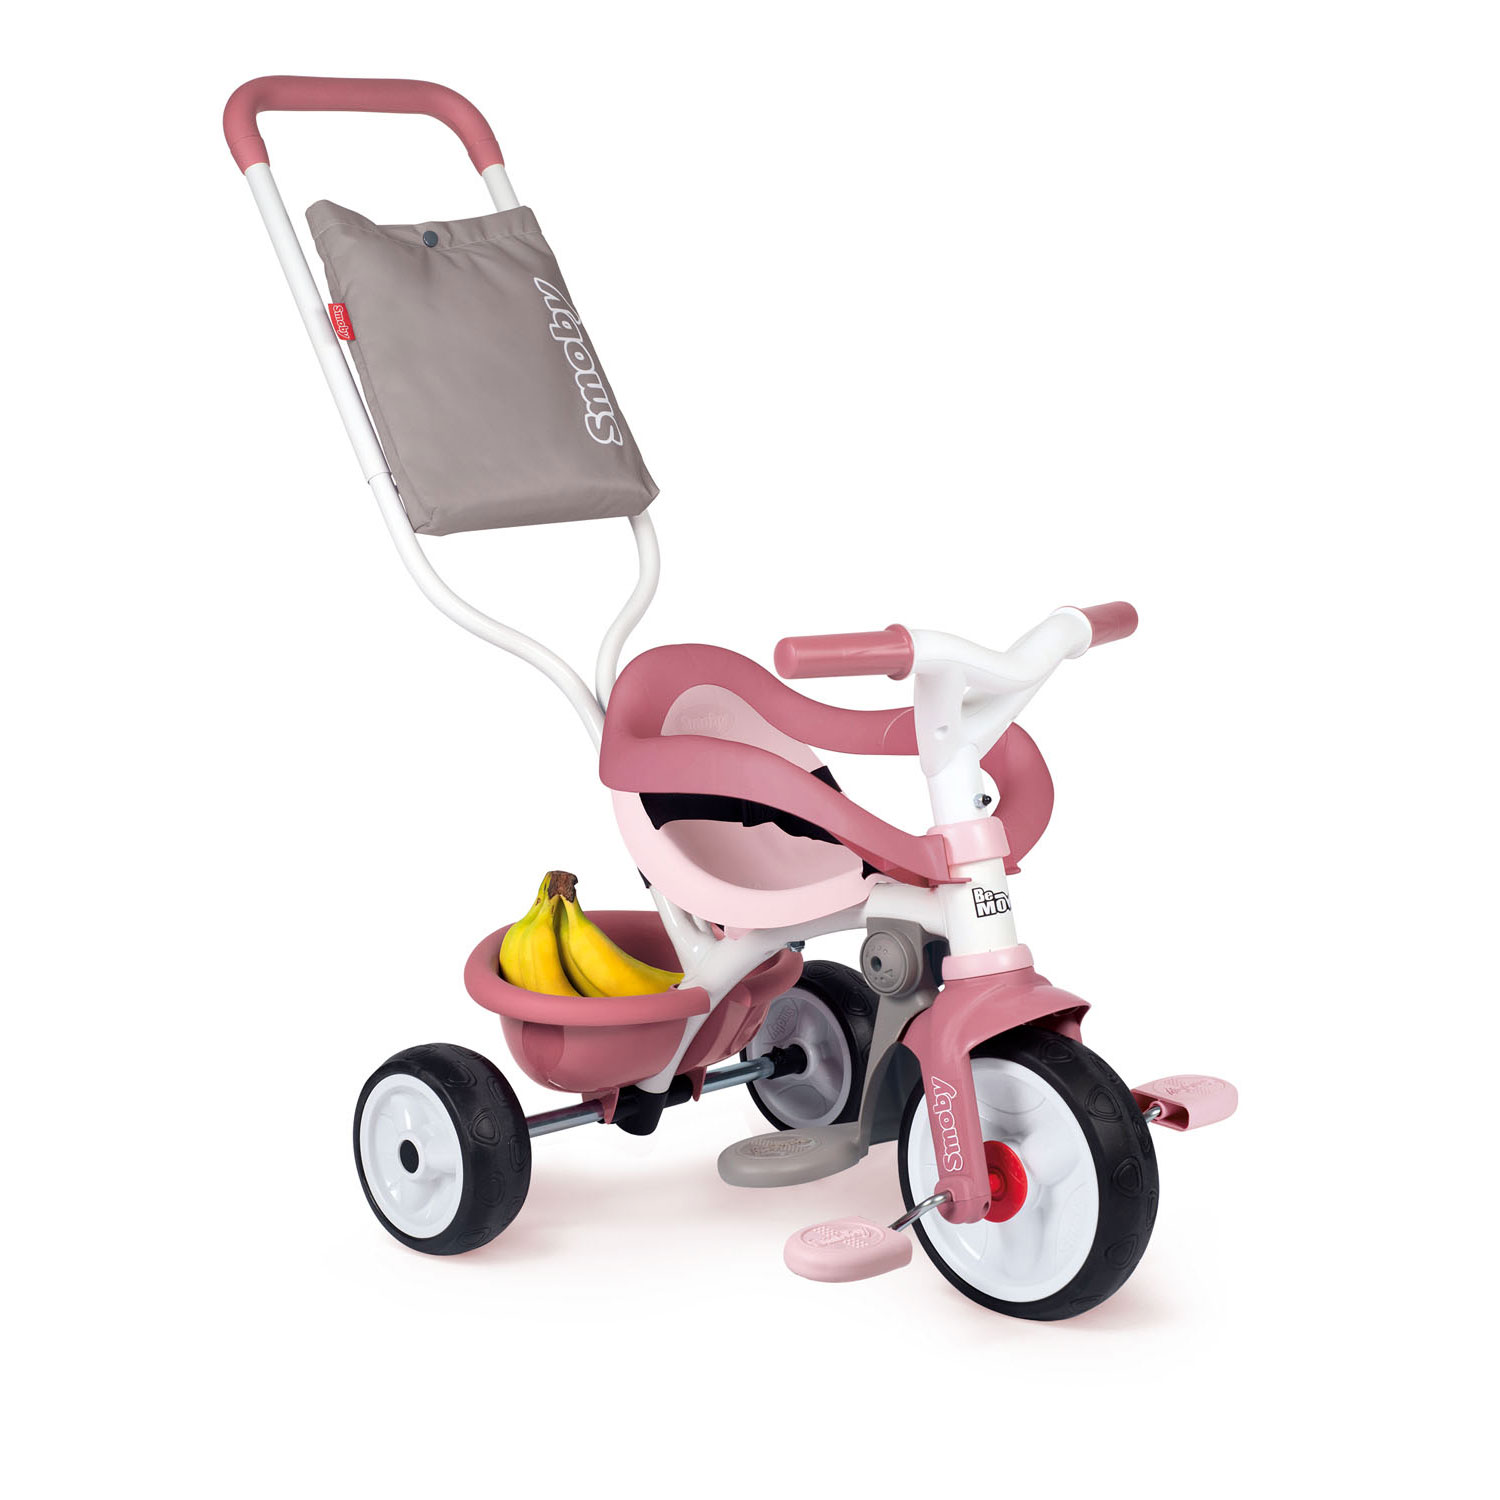 Smoby Be Move Comfort Driewieler Roze